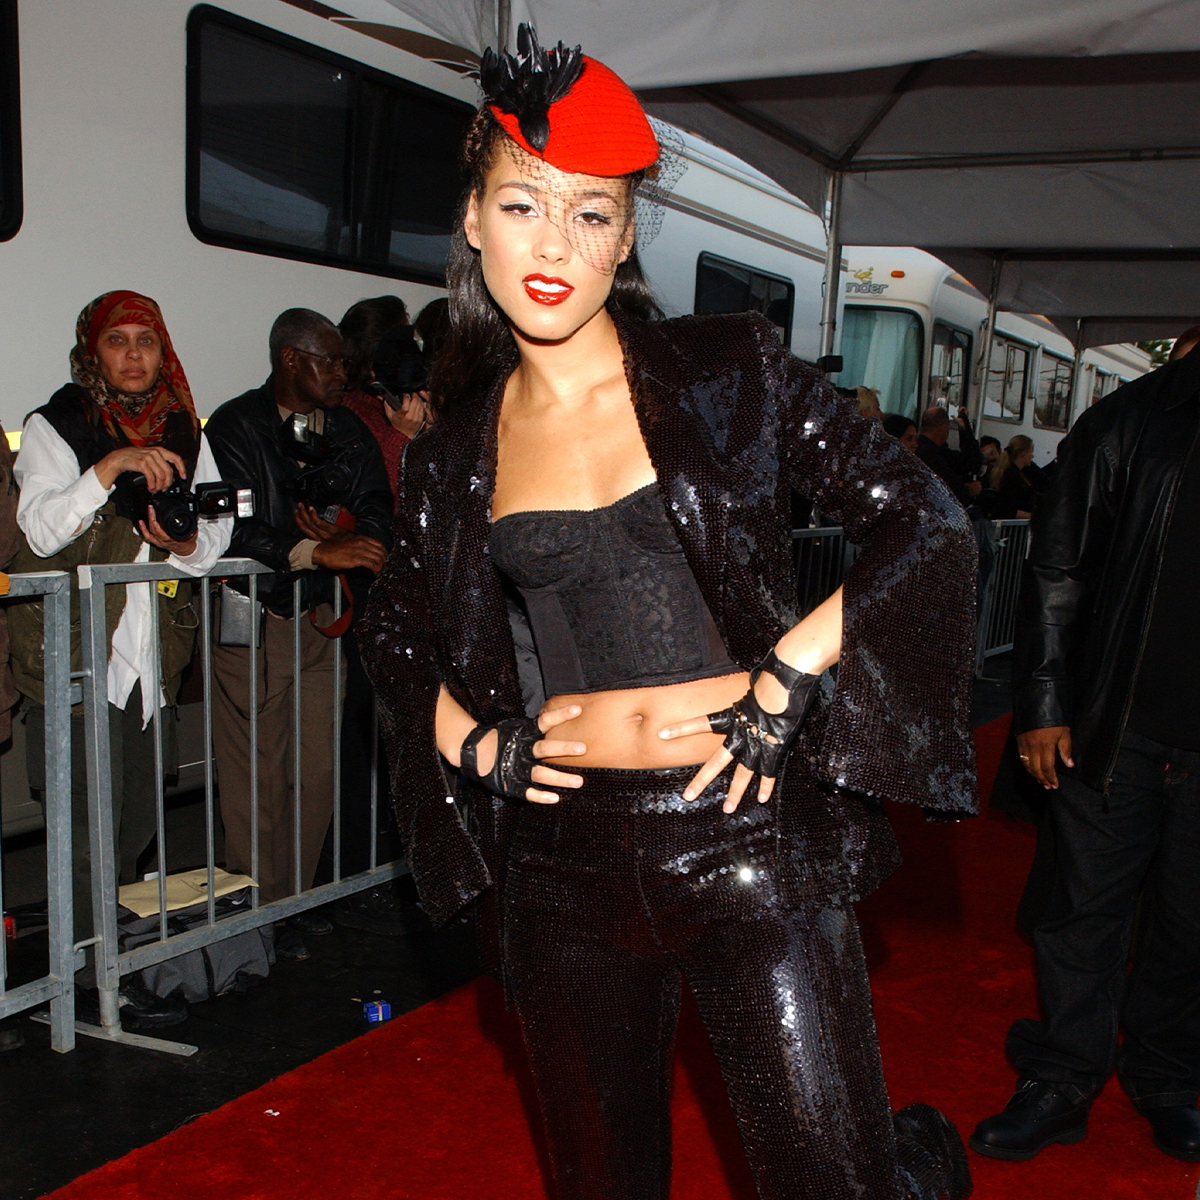 Let These Photos From the 2002 AMAs Serve as the Ultimate Throwback